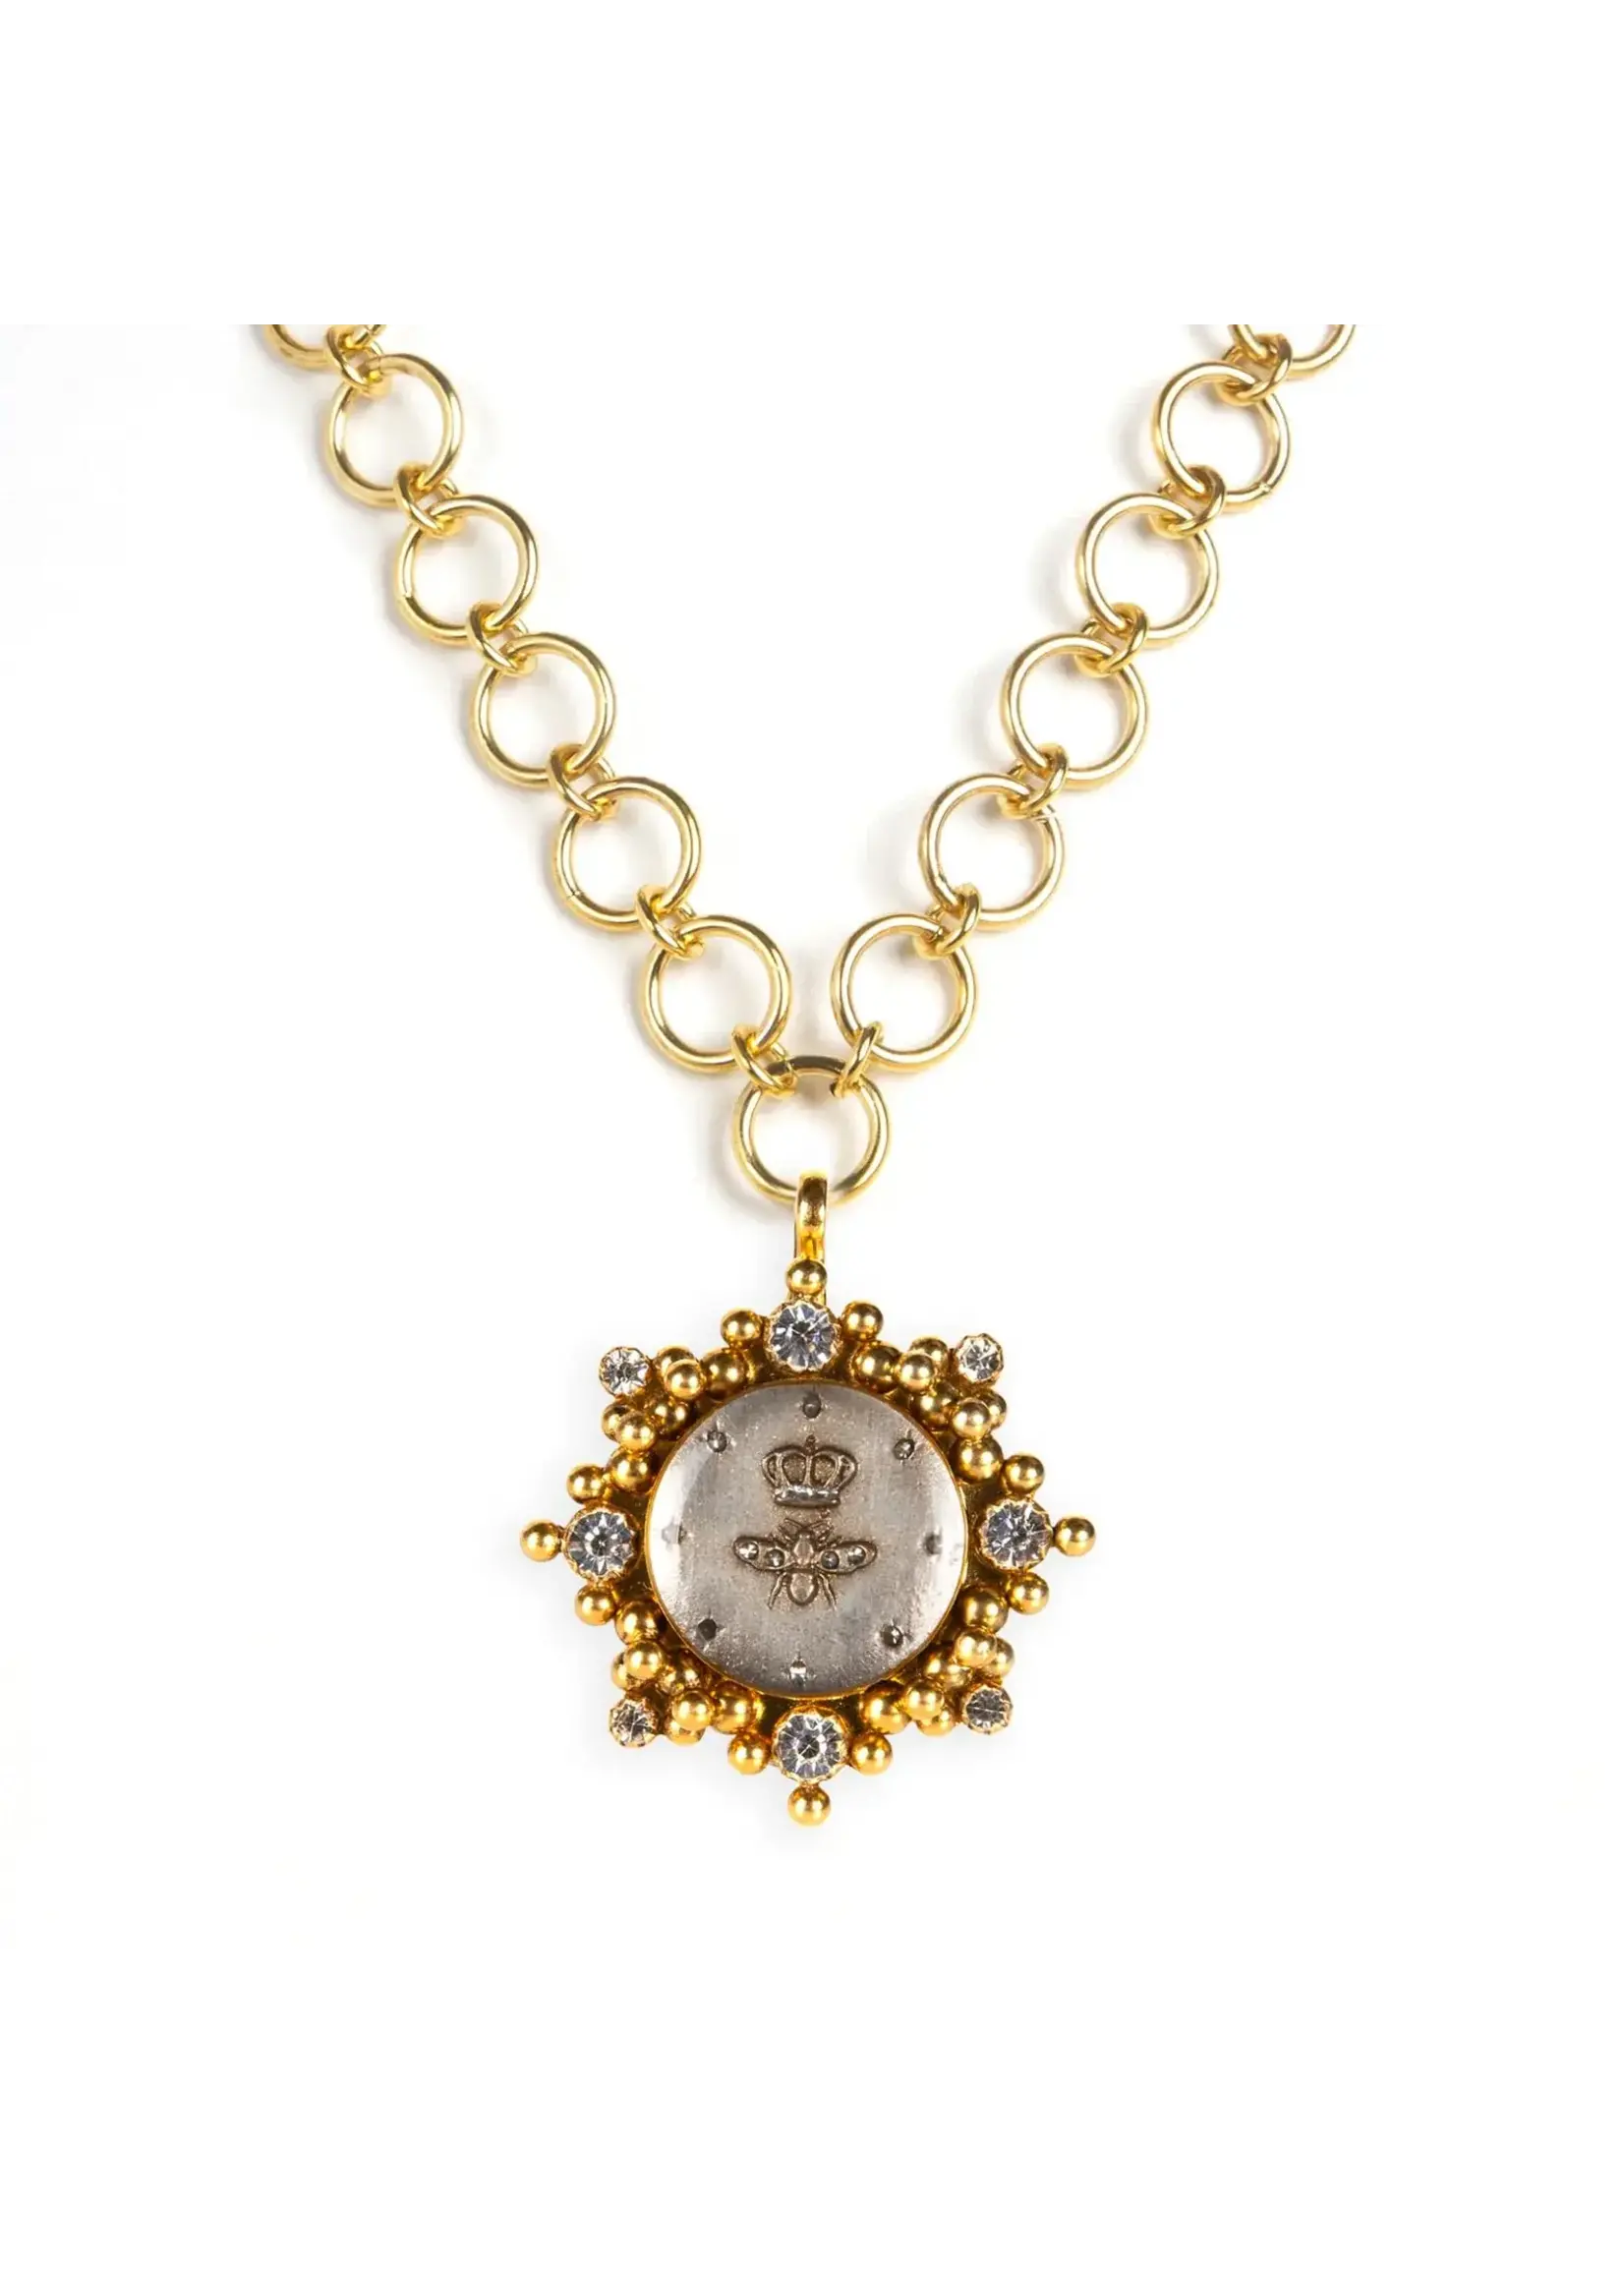 VSA Designs Betty Necklace w/Queen Bee (Gold)